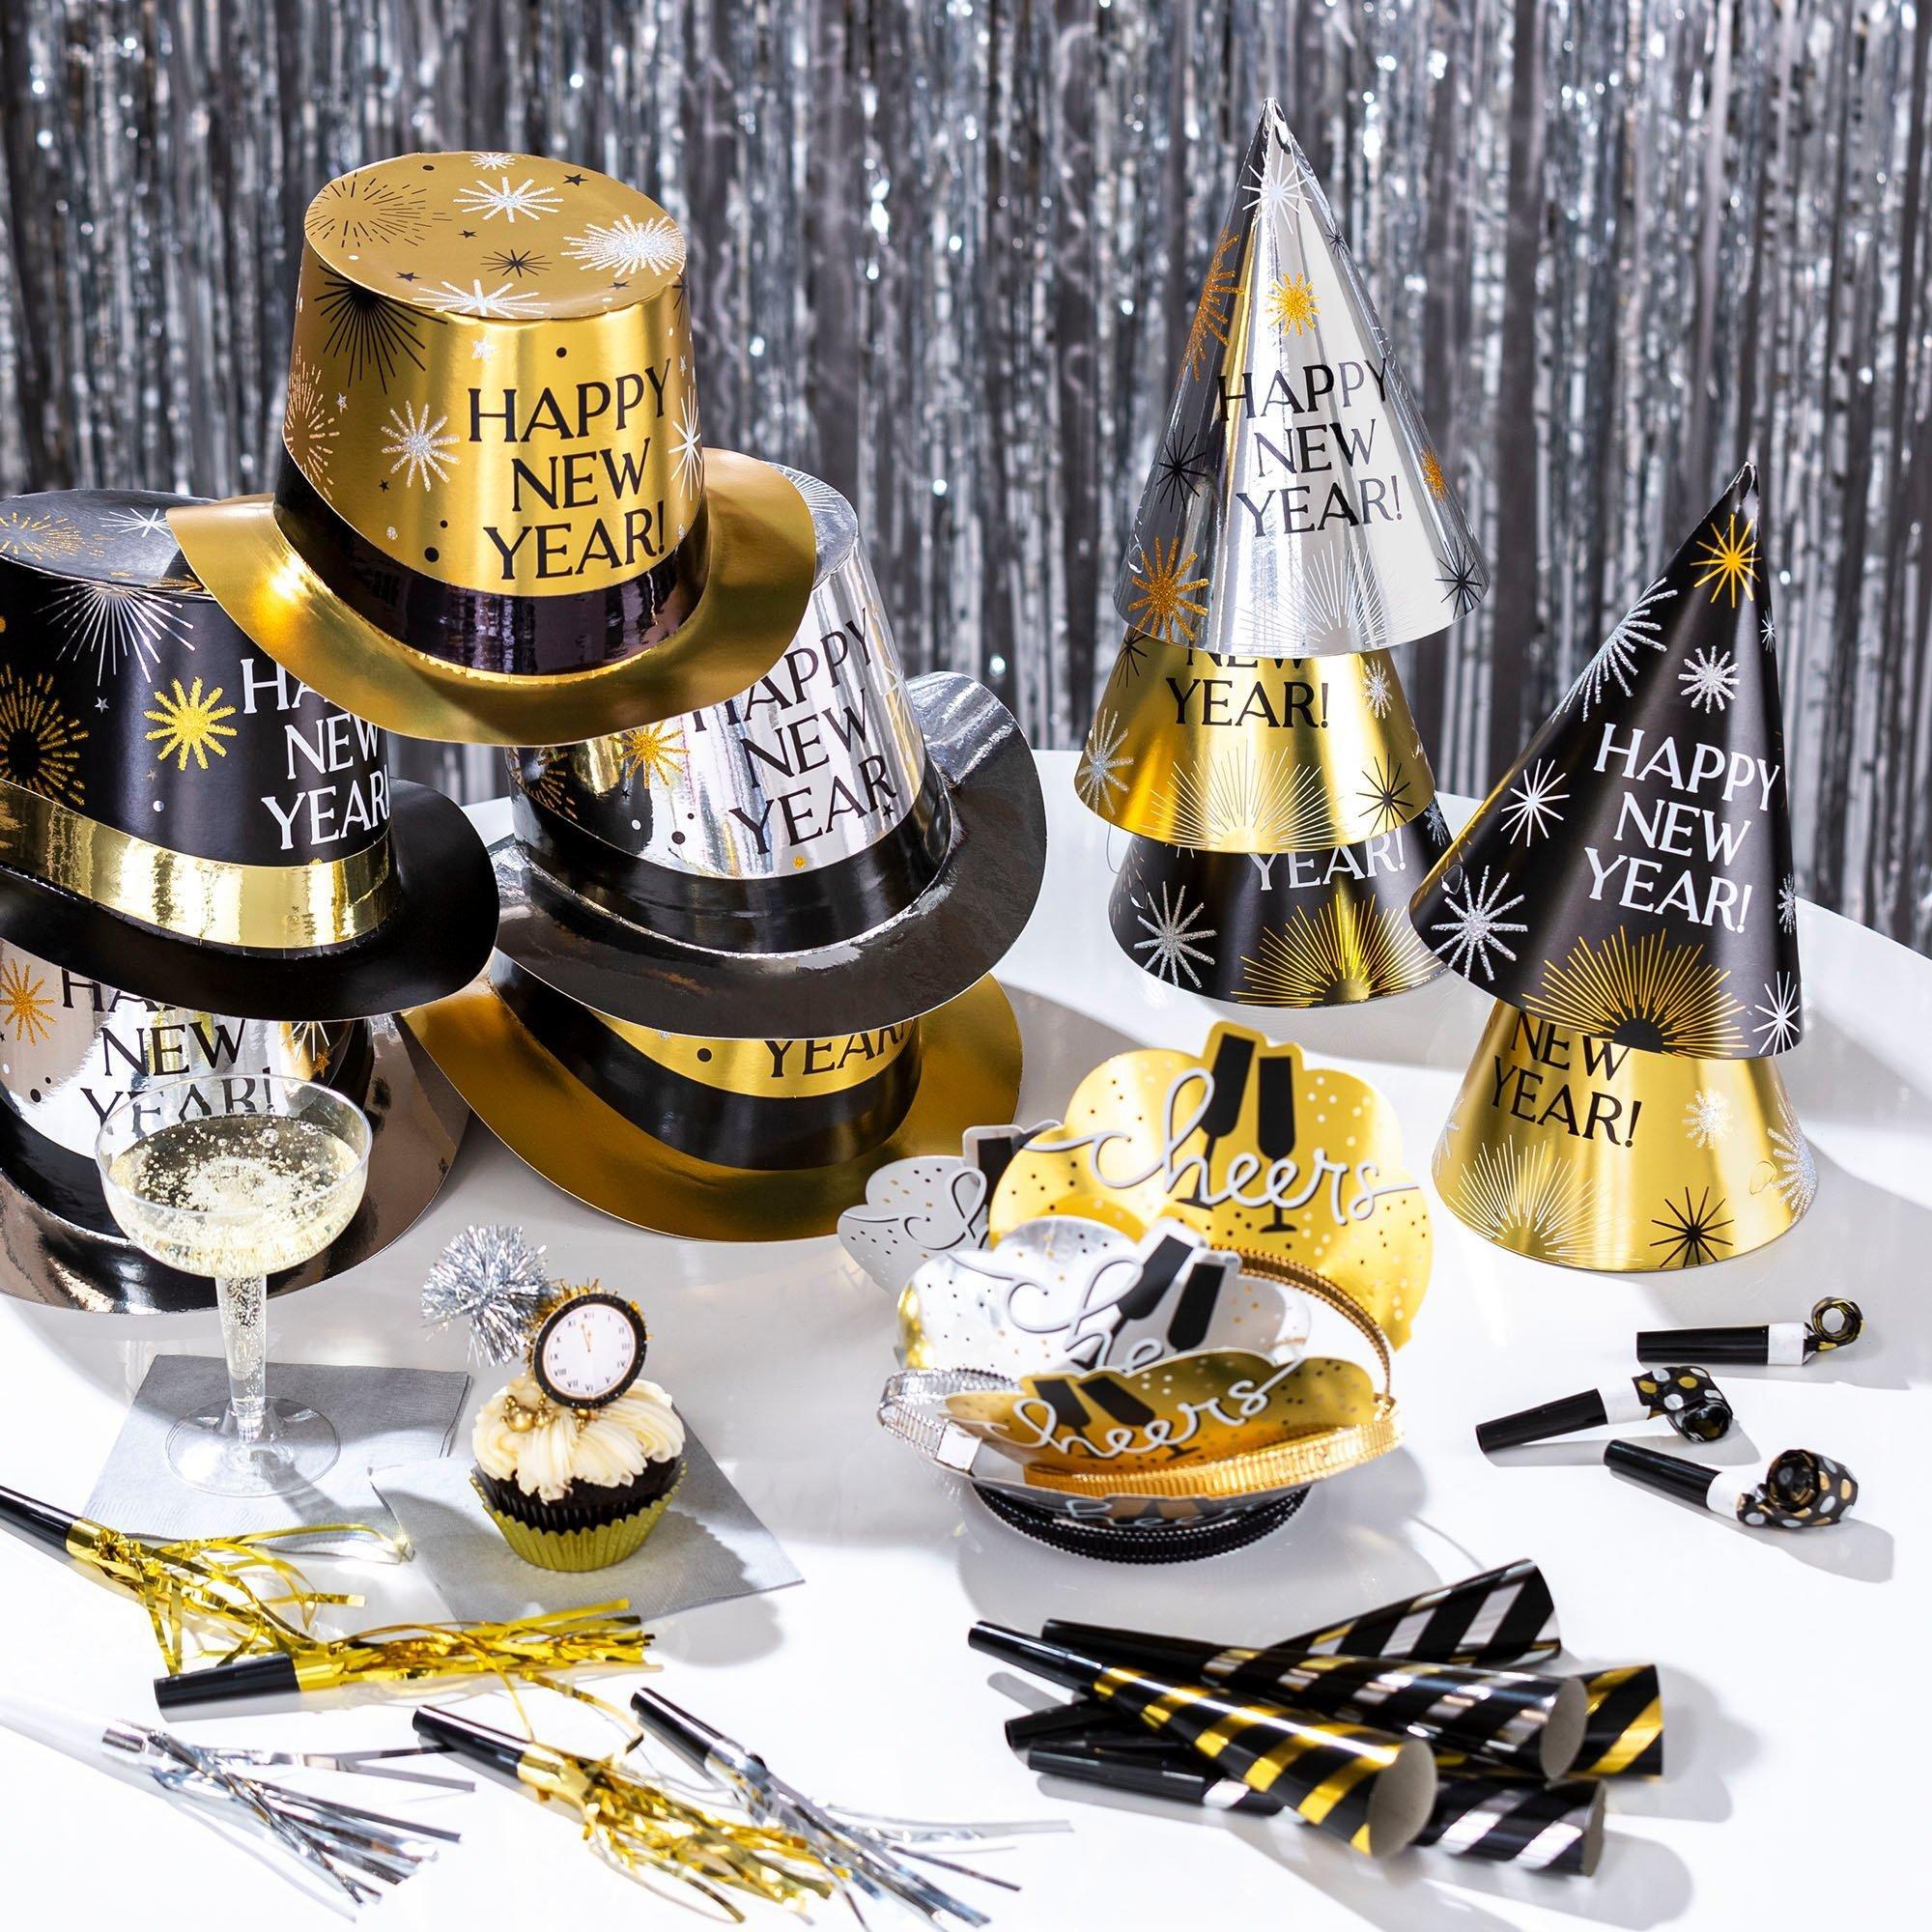 Kit for 600 - Opulent Affair New Year's Eve Party Kit, 1,200pc